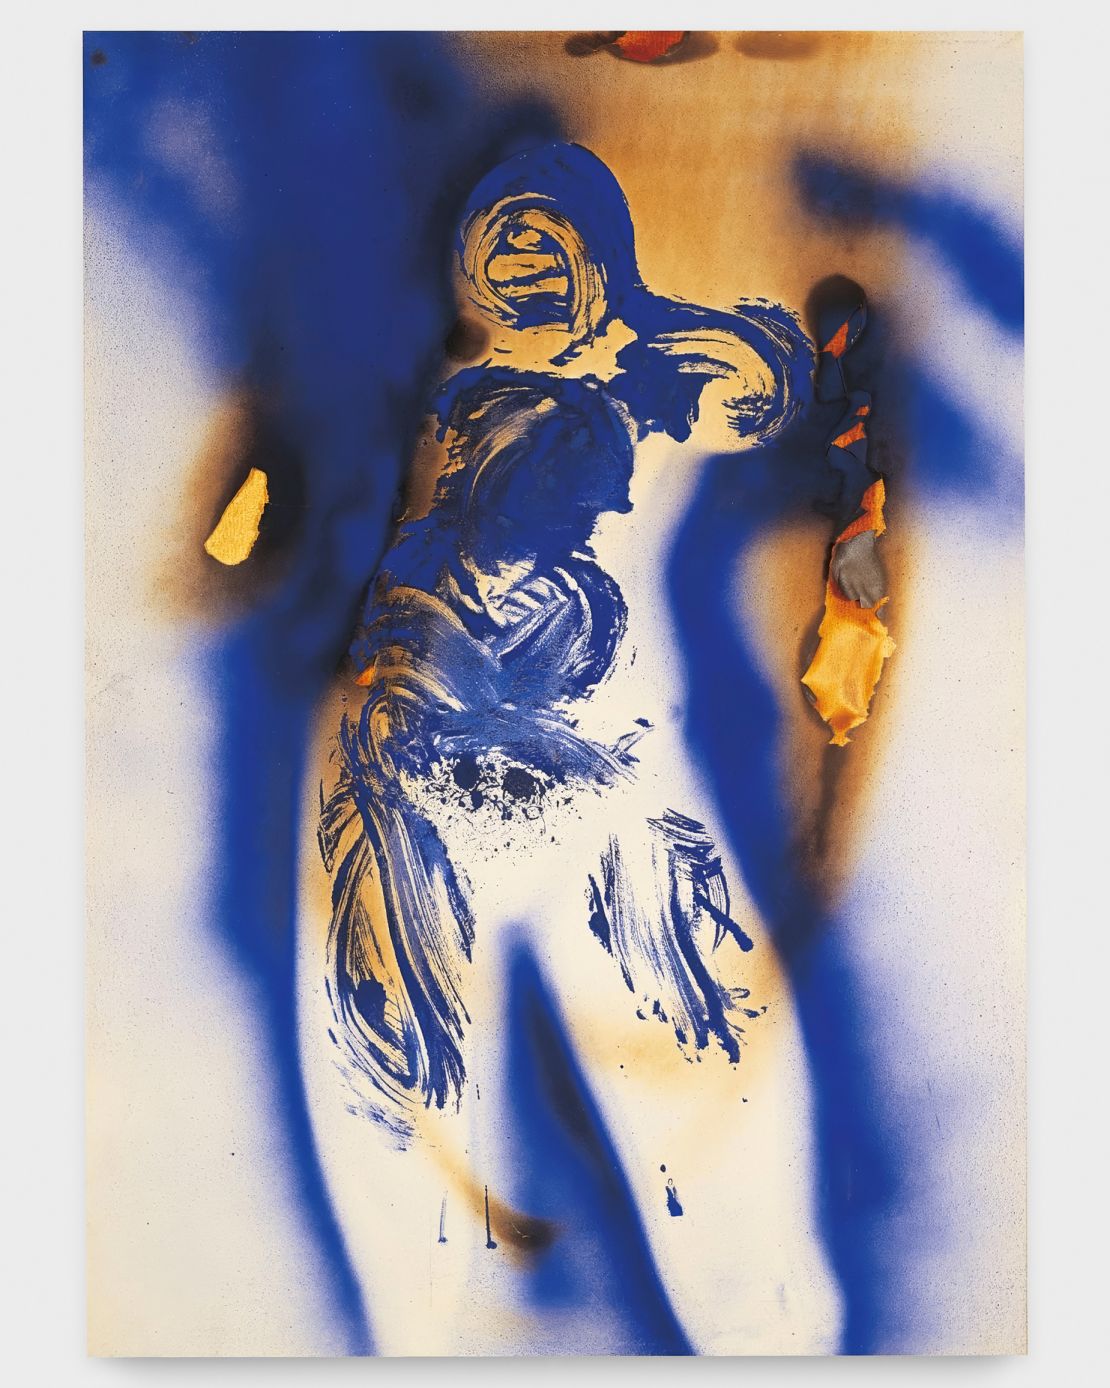 Performers imprinted themselves against the surface or had their contours captured through spray-painted or blow-torched canvas.